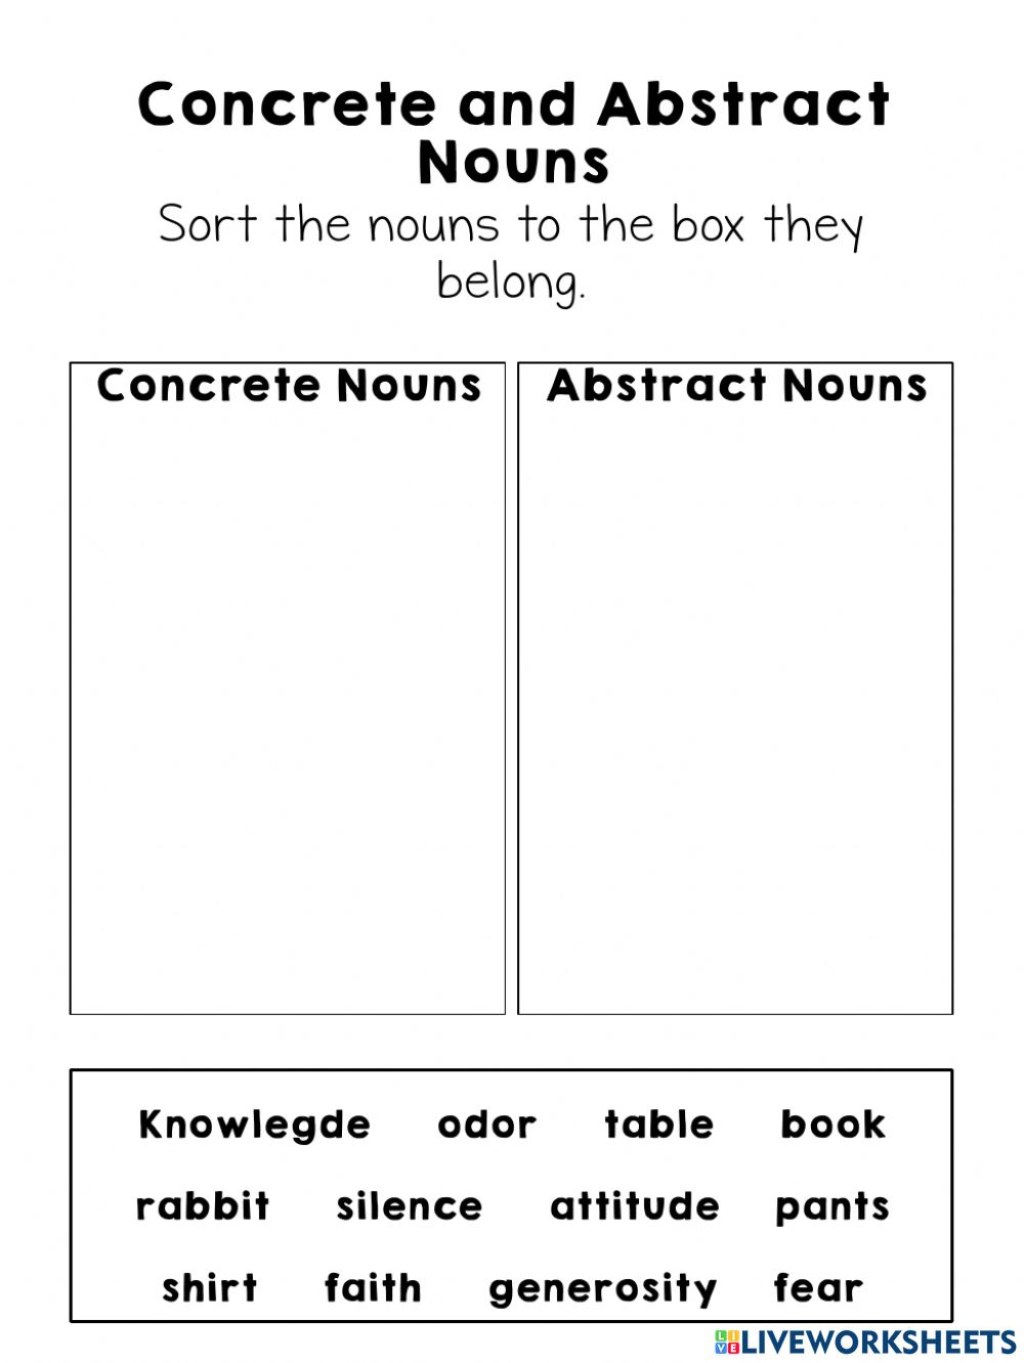 Picture of: Concrete and Abstract Nouns